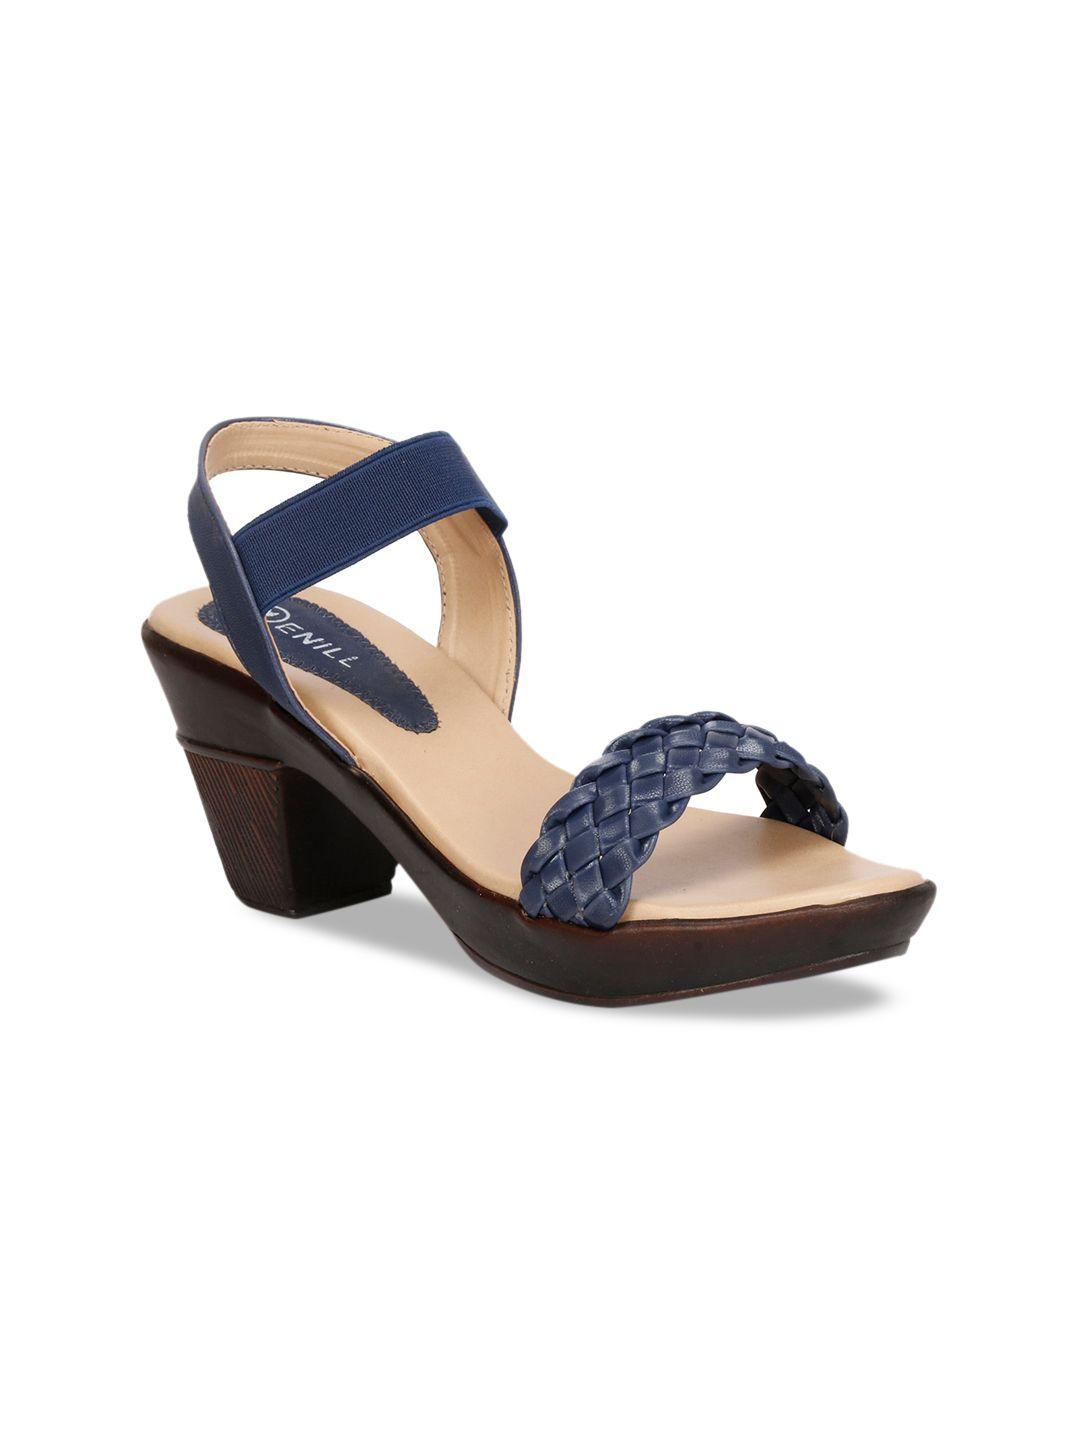 denill blue block sandals with buckles